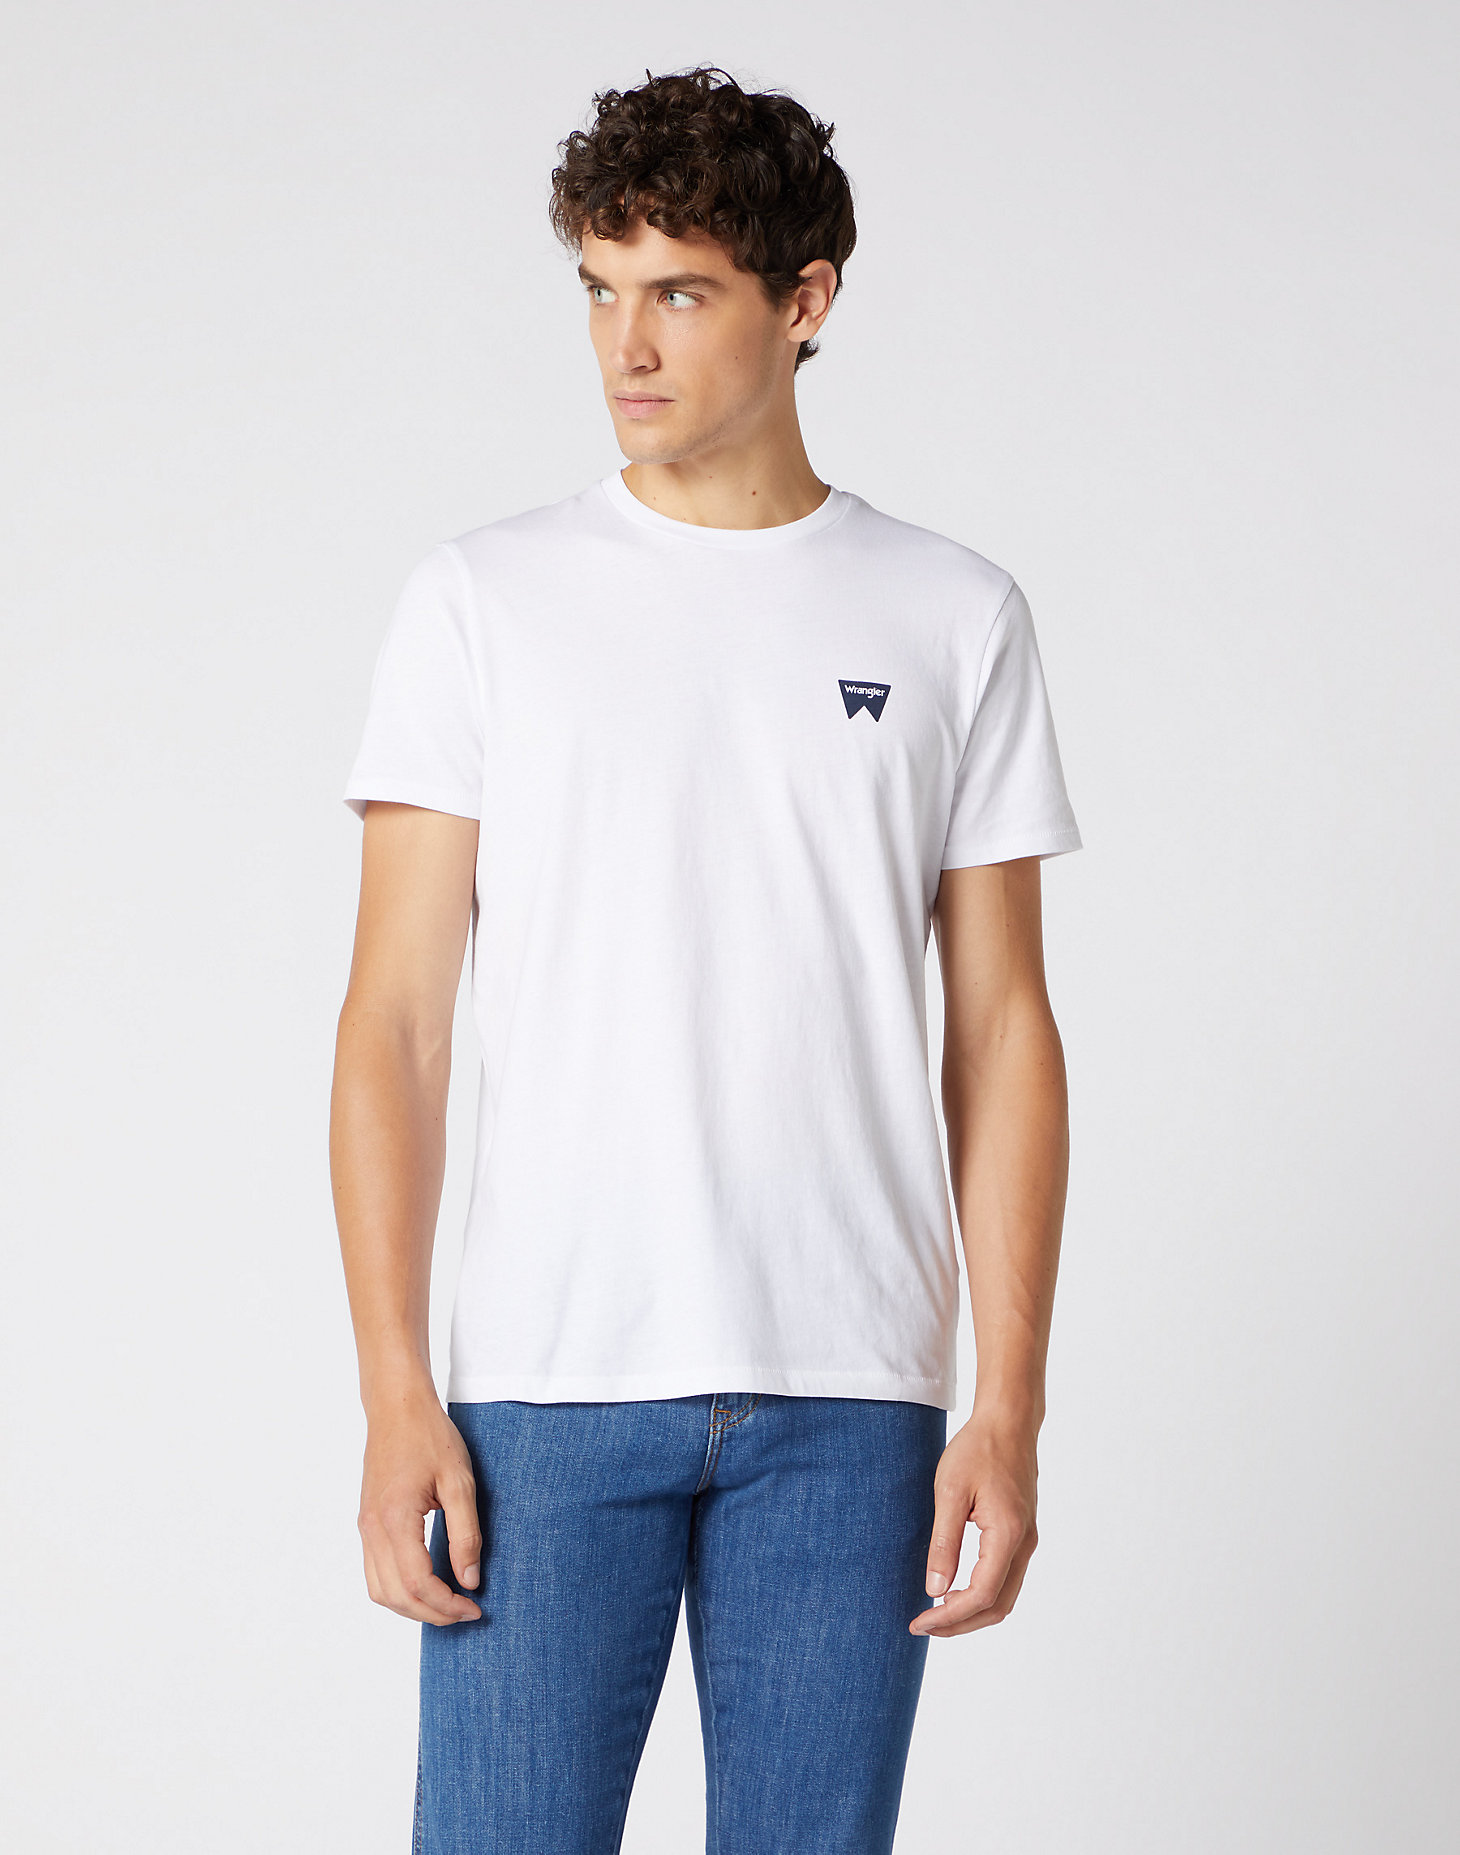 Sign Off Tee in White alternative view 5